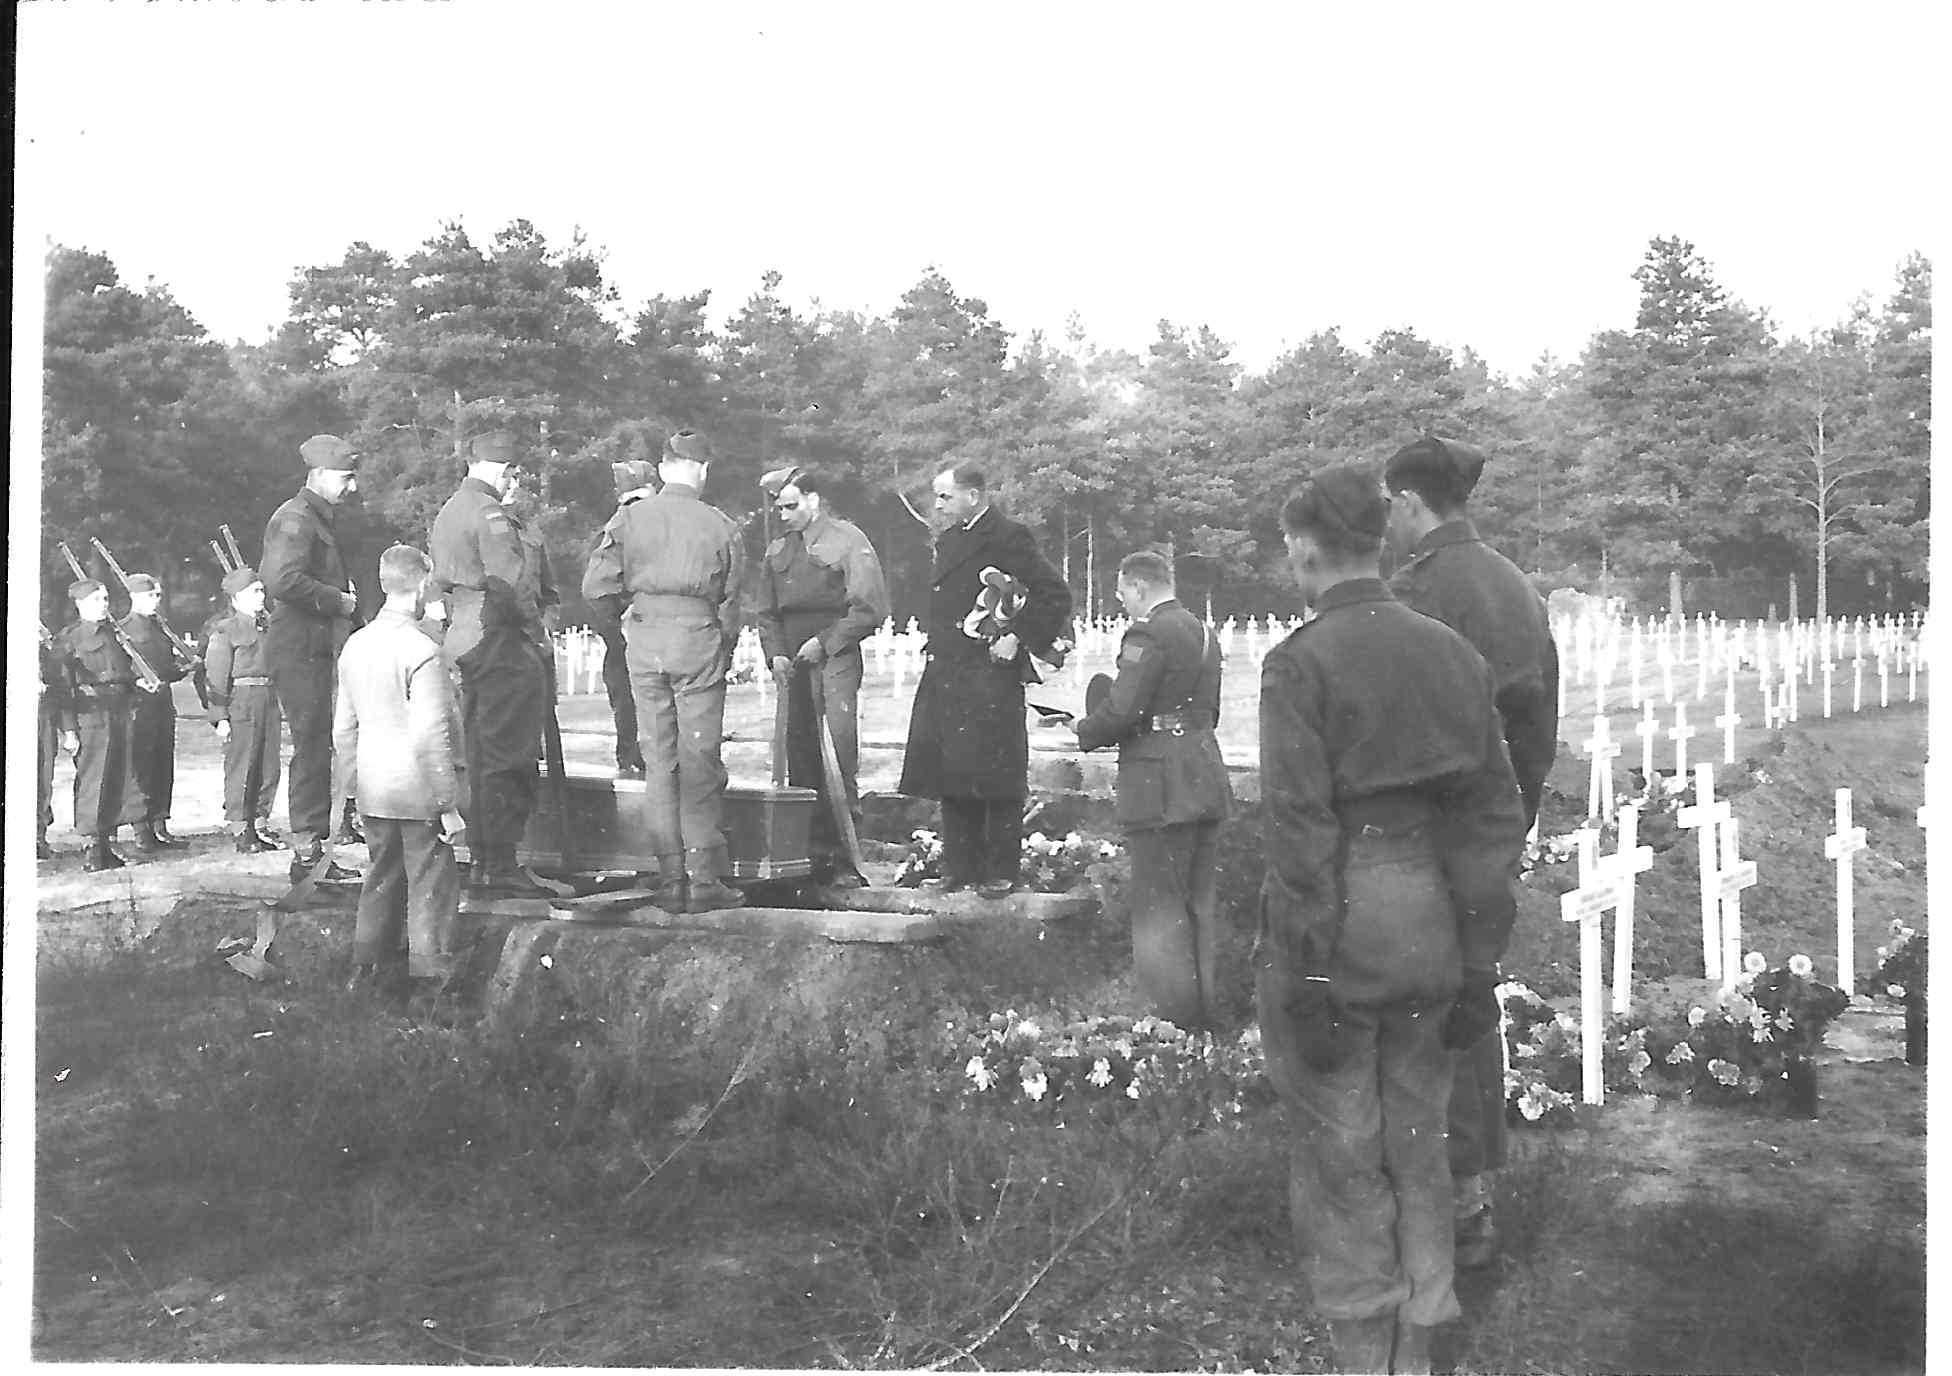 Black and white photograph. Men in various uniforms stand among a field of white crosses, lowering a coffin into a grave. A military padre stands at the head of the grave.